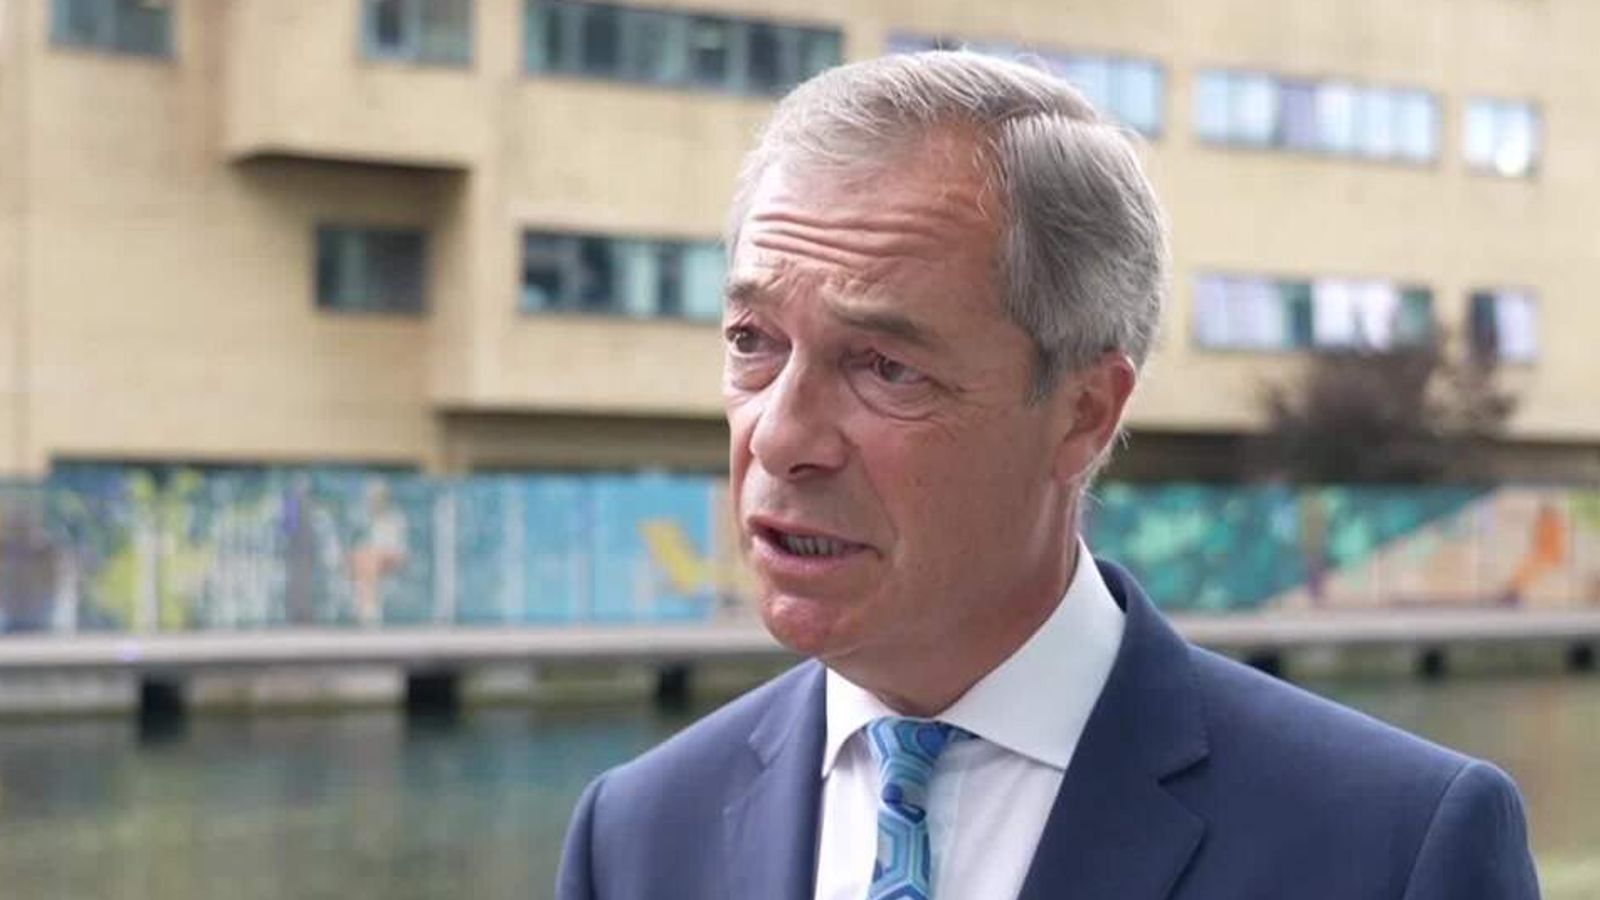 City minister summons bank bosses over 'de-banking' after Farage account closure